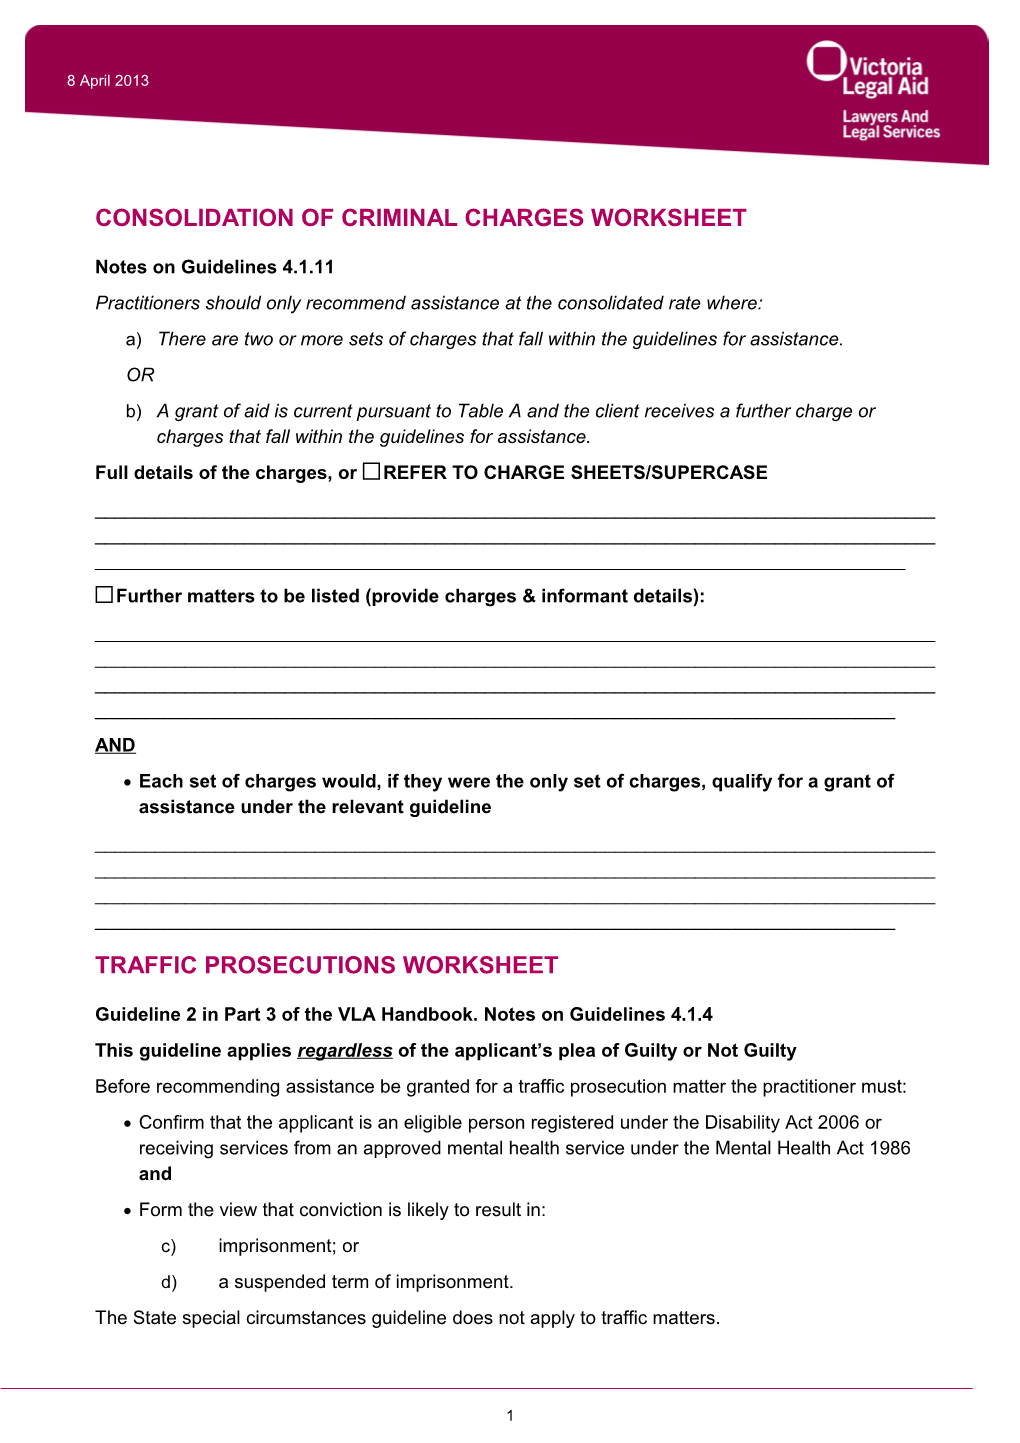 Consolidation of Criminal Charges Worksheet